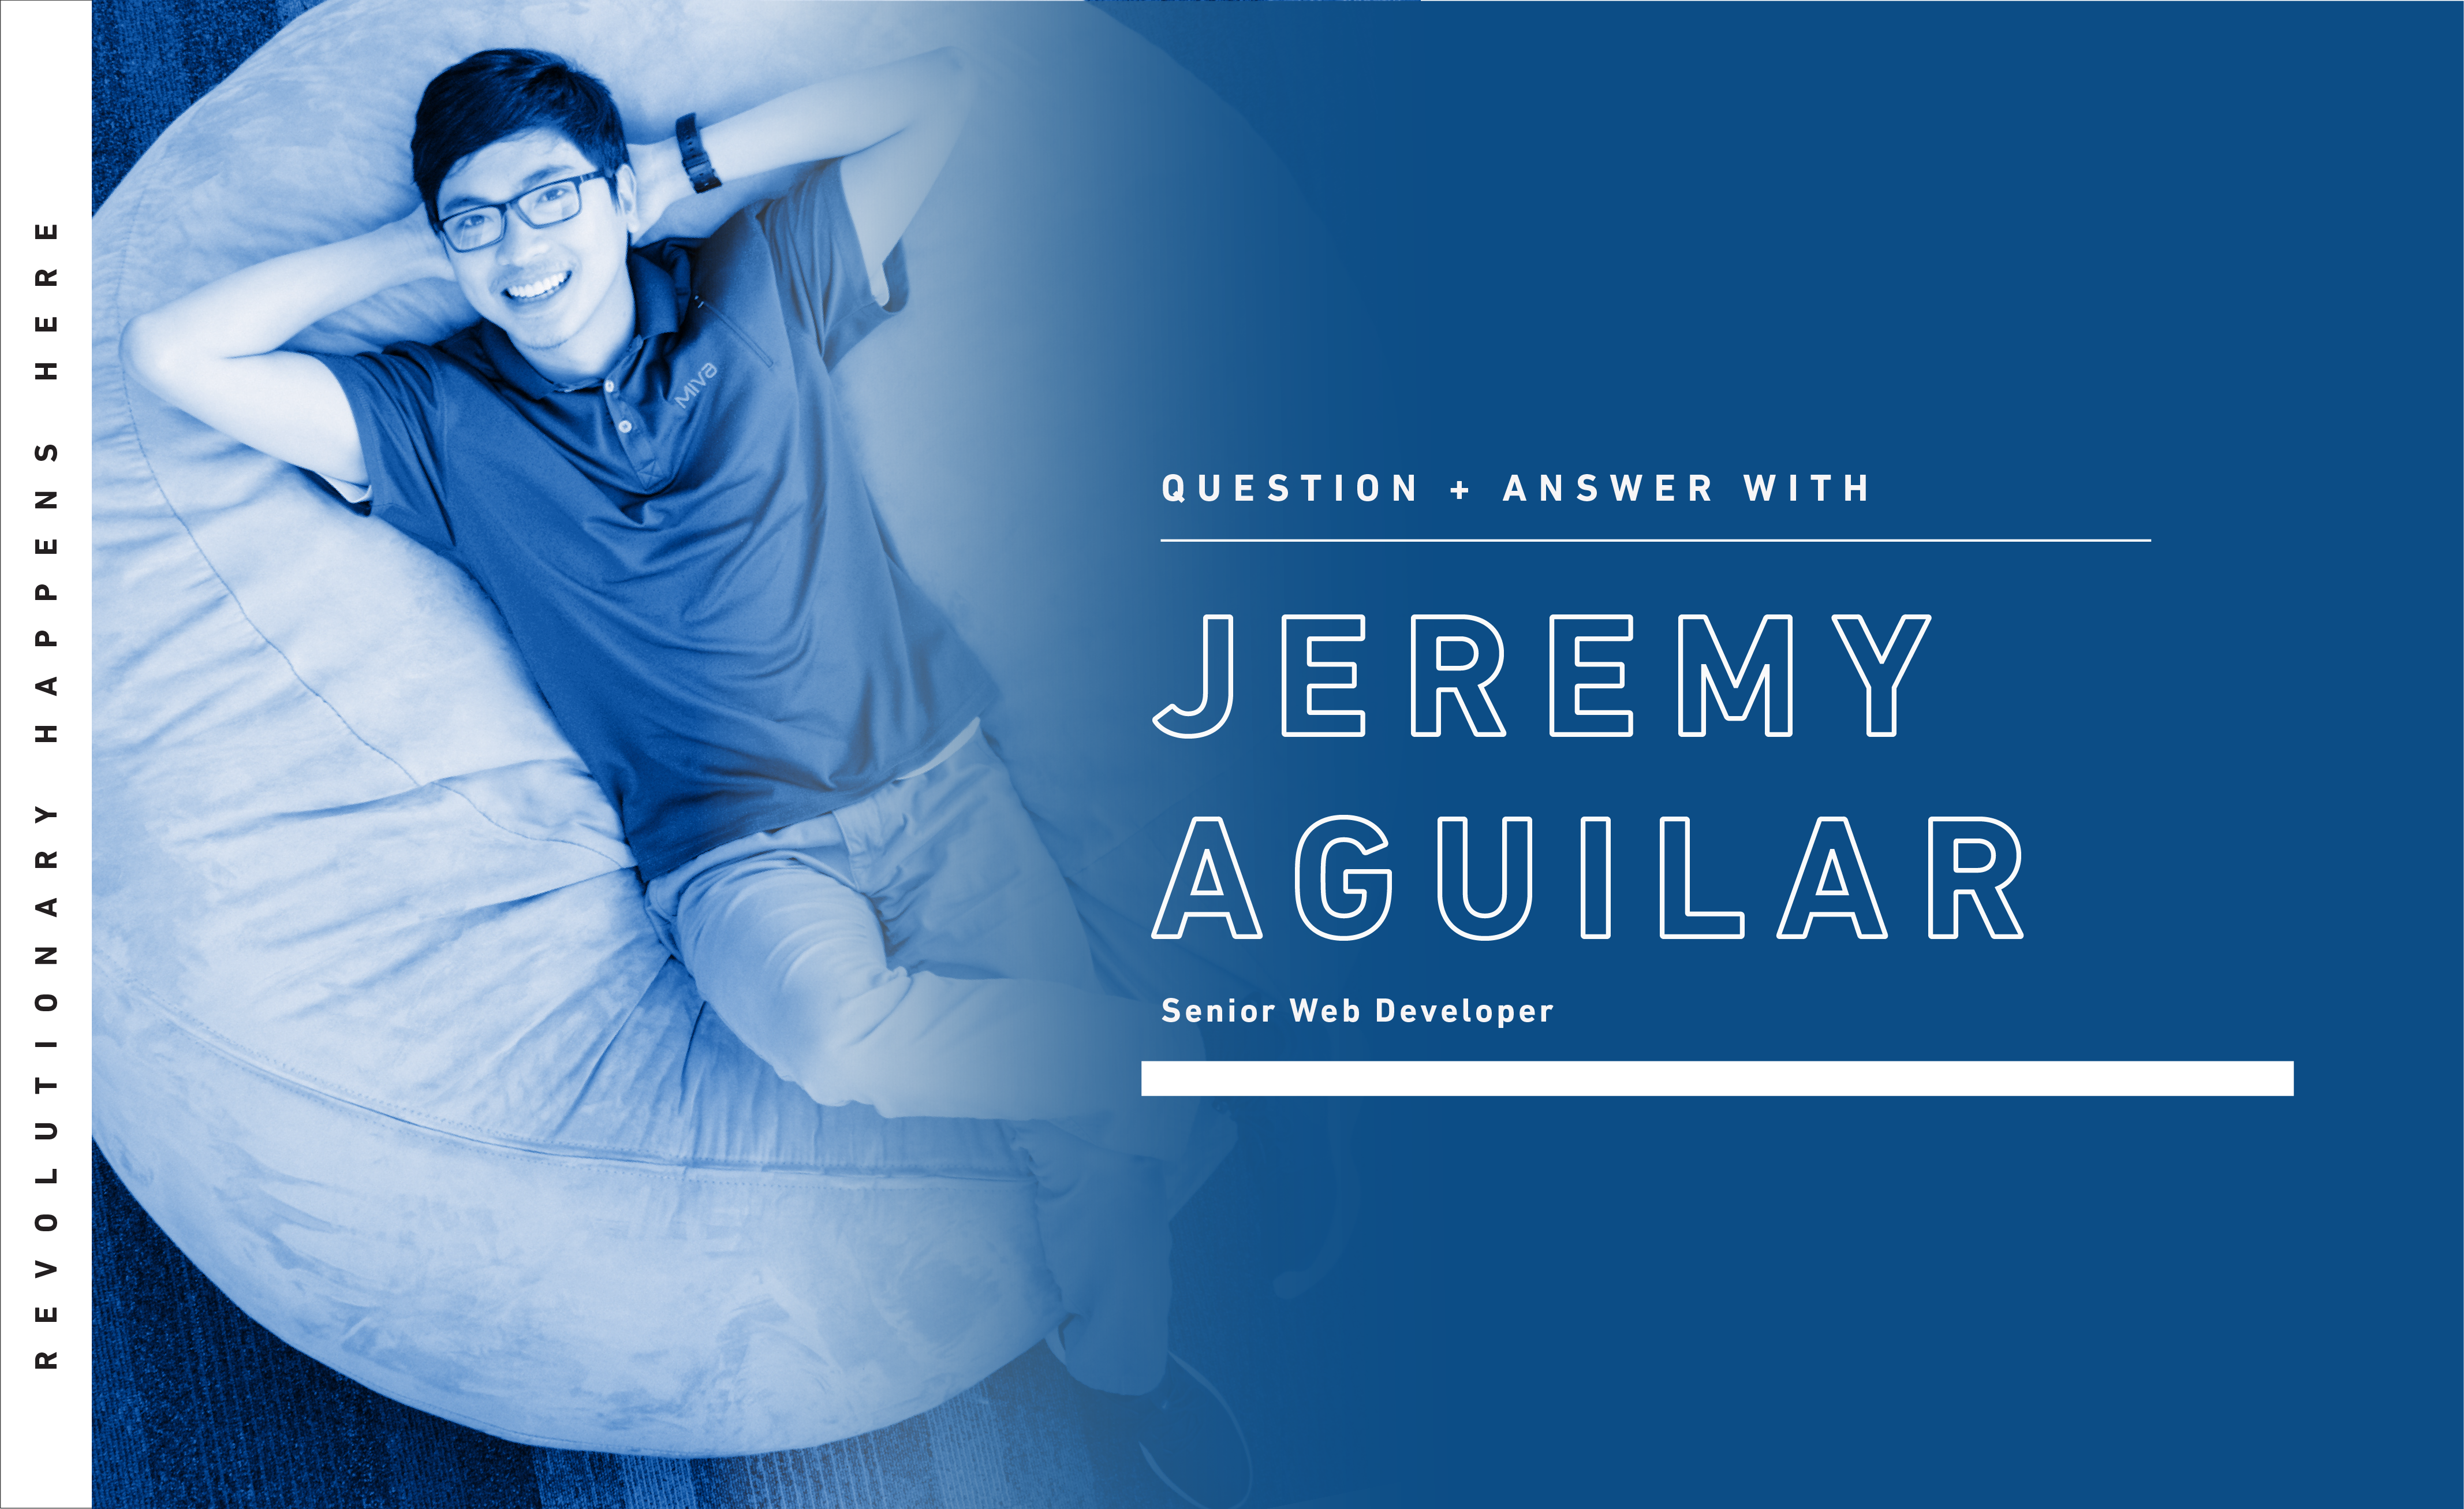 Q&A with Jeremy Aguilar